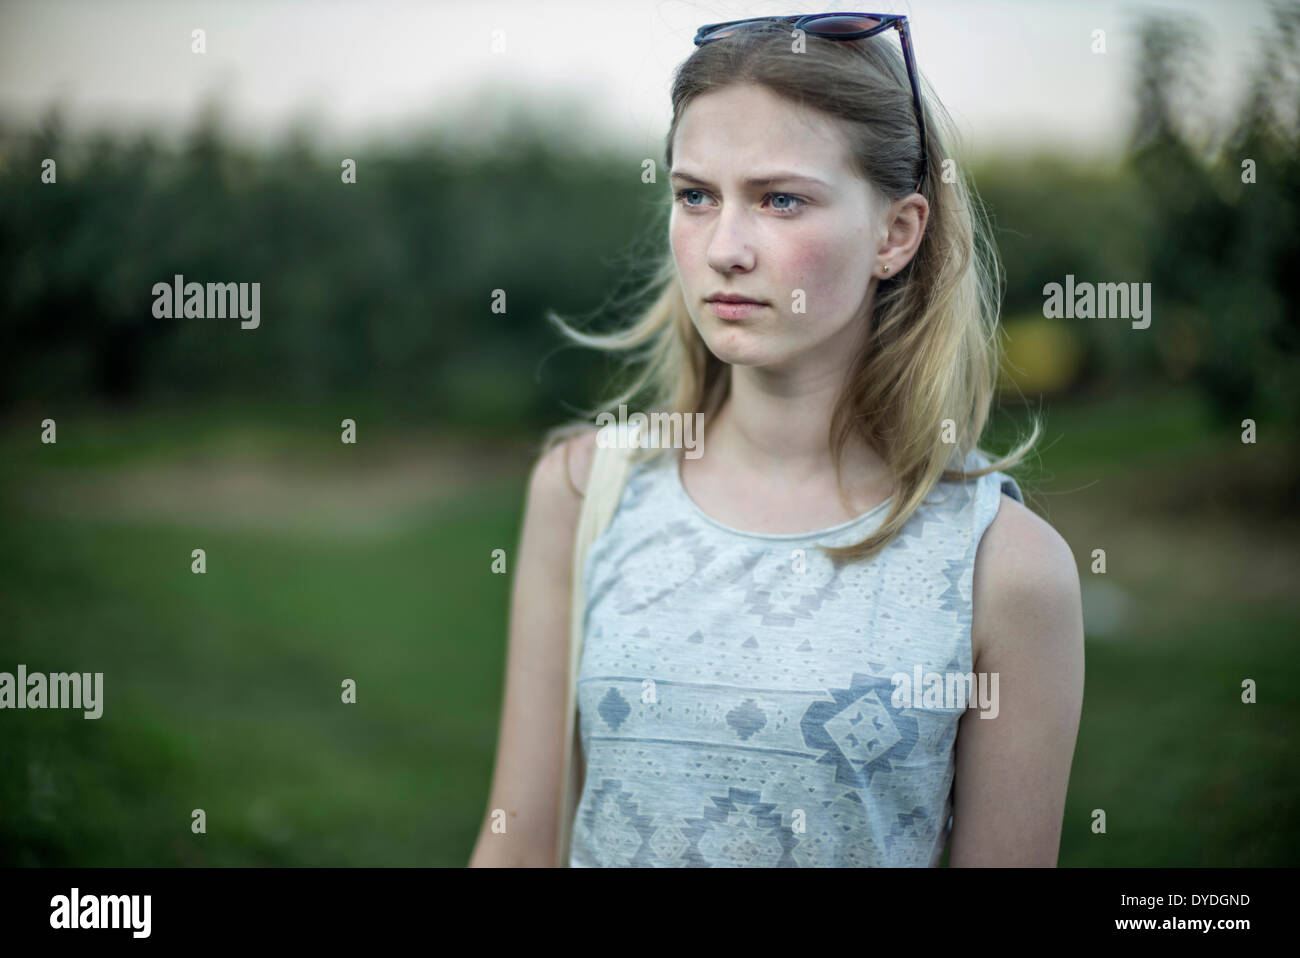 Daydreaming girl in the countryside. Stock Photo